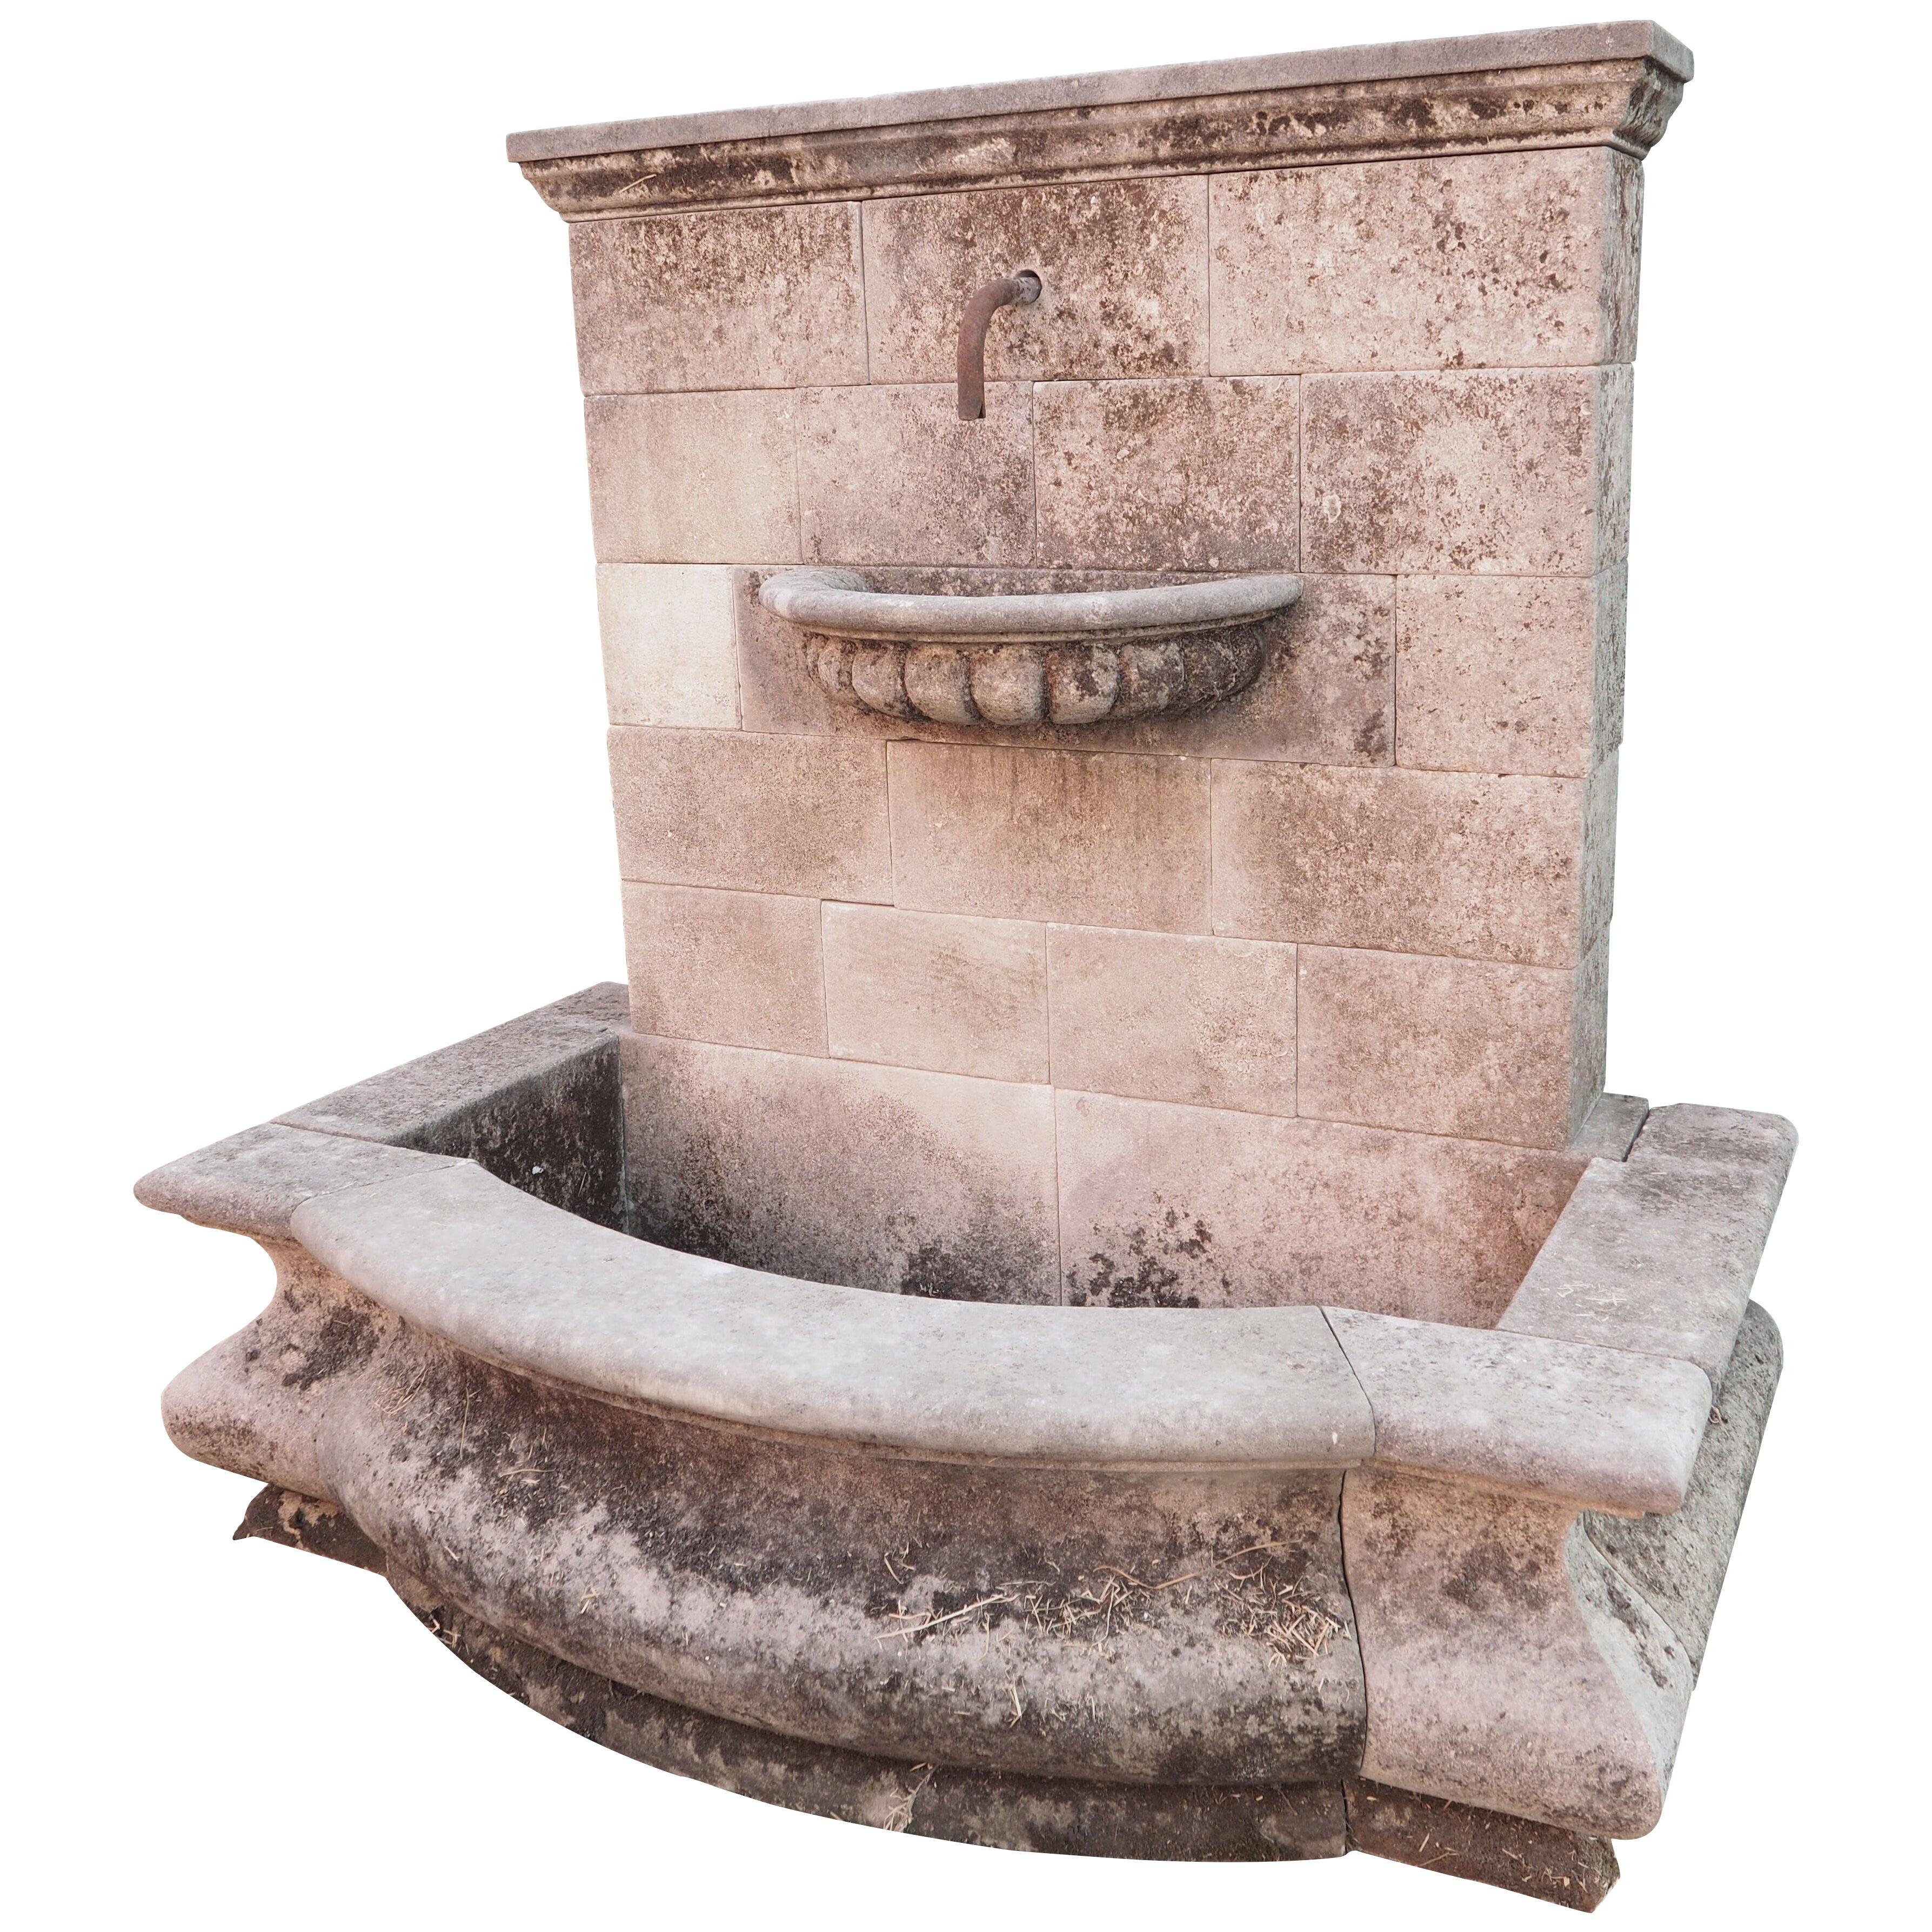 Carved Limestone Wall Fountain with Spill Bowl from Northern Italy